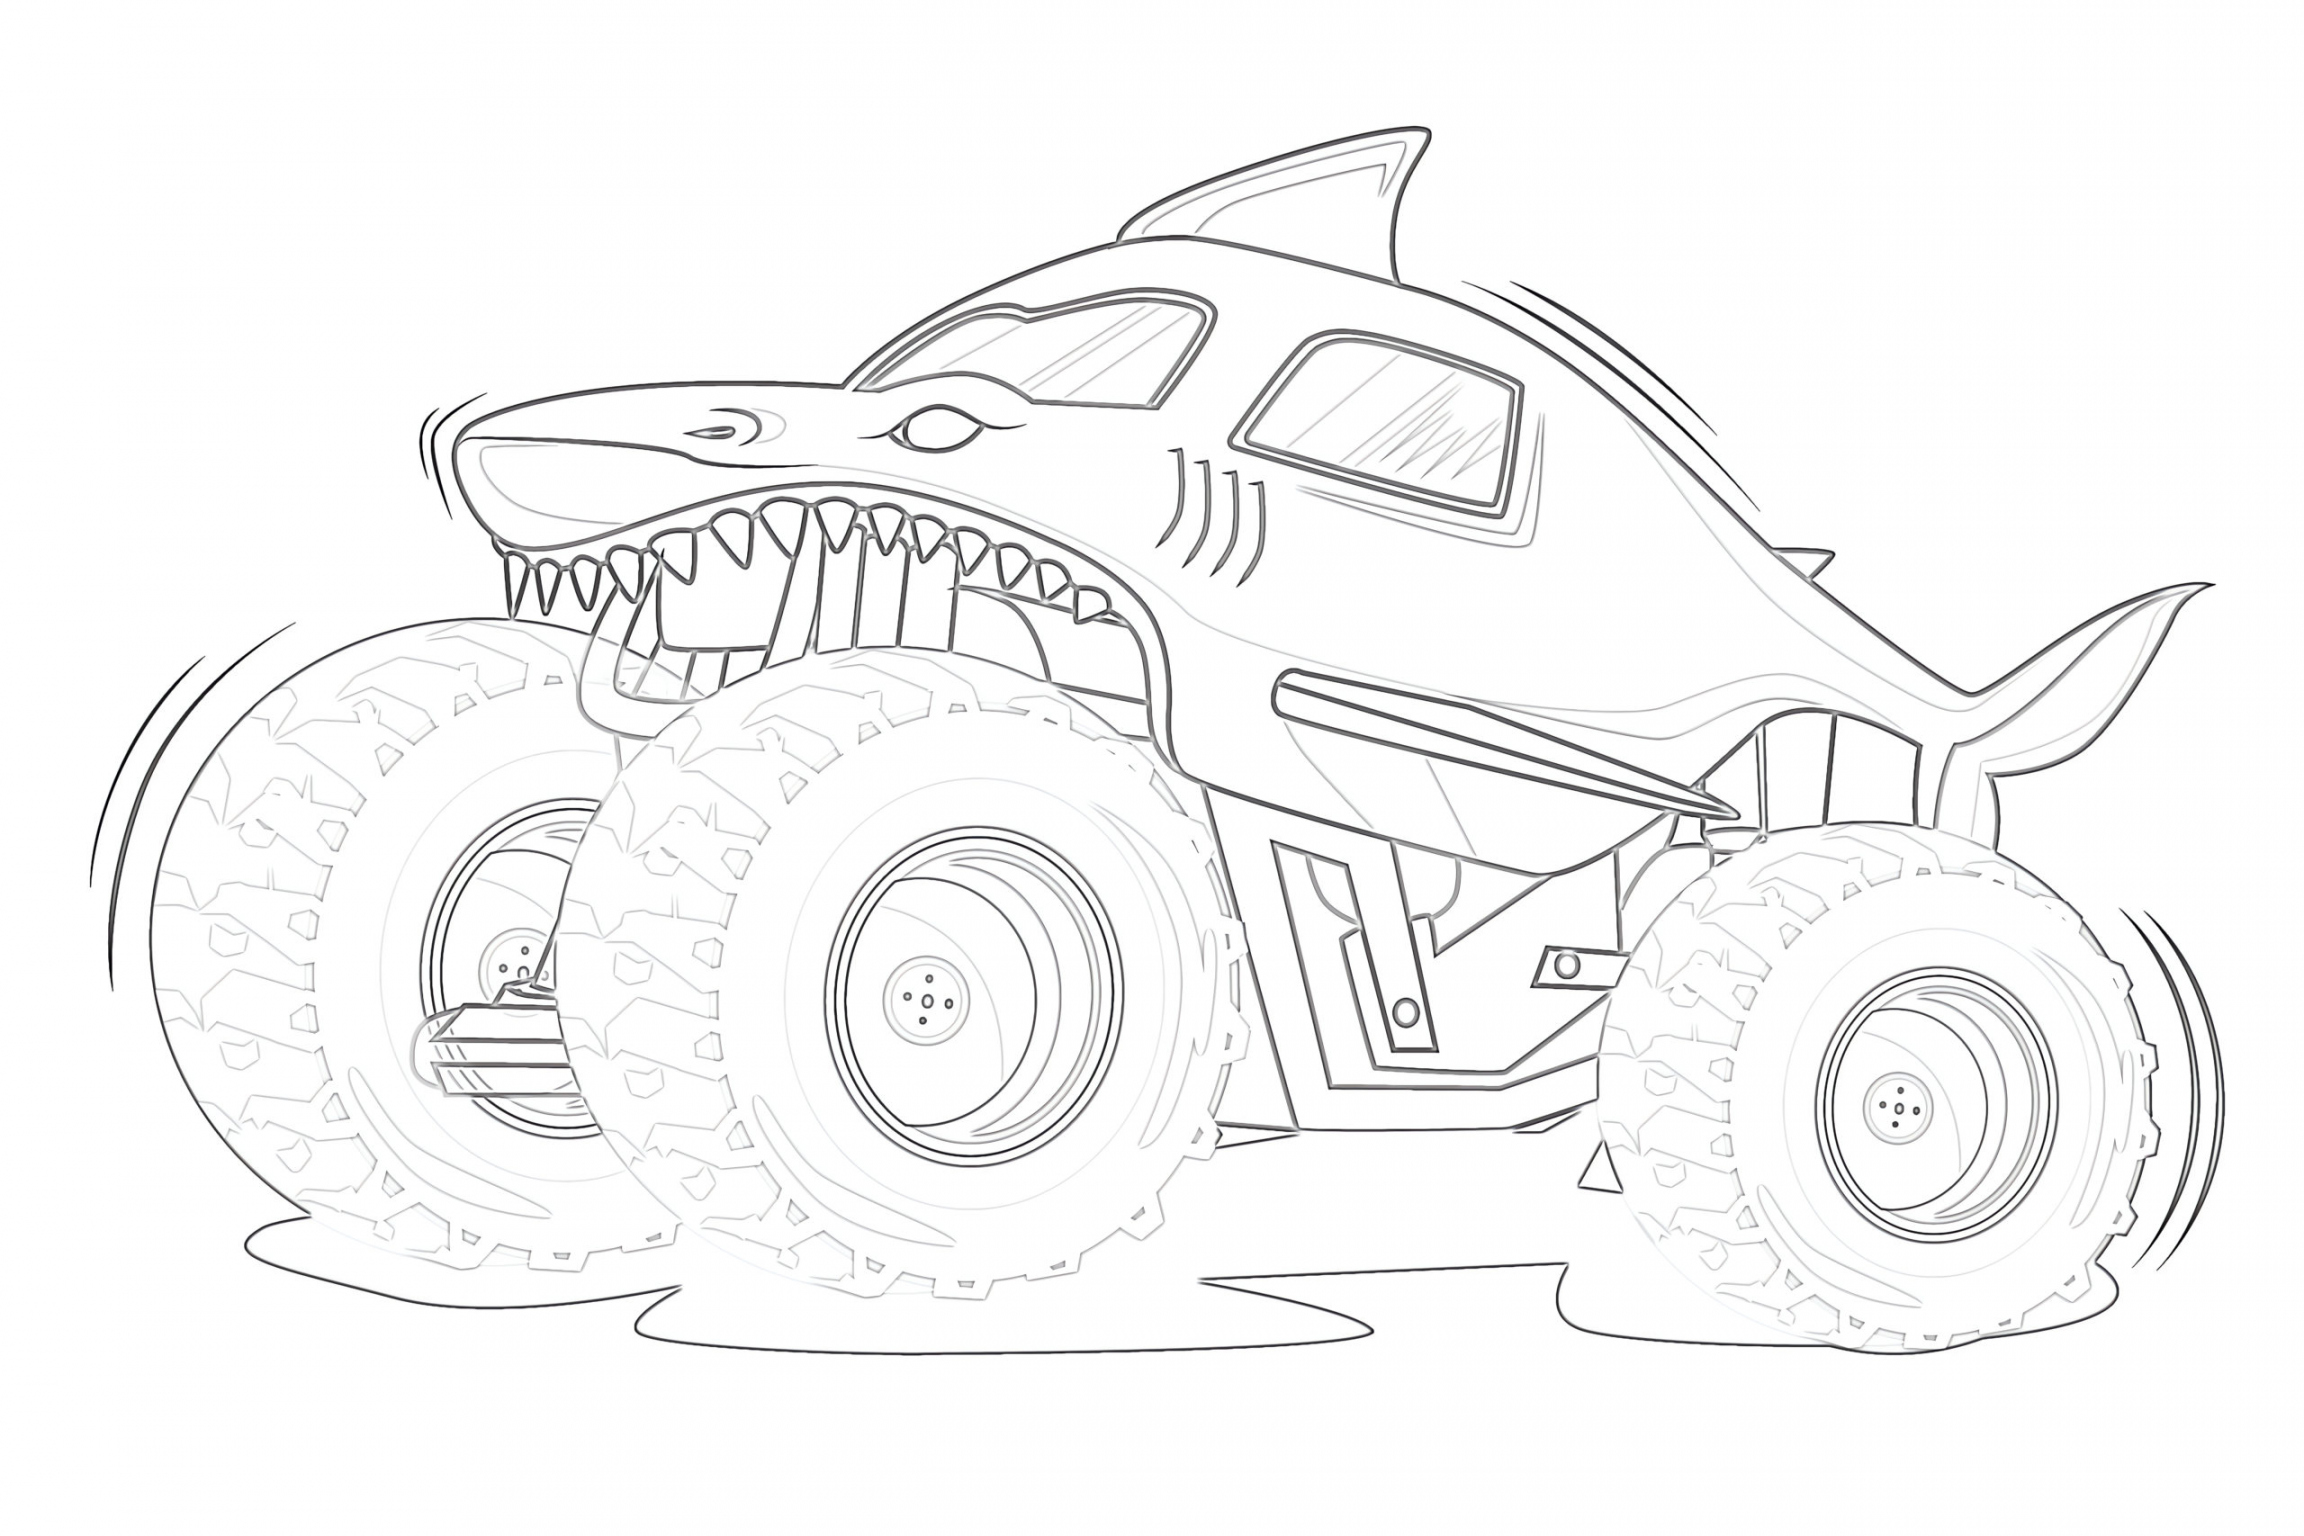 Shark Monster Truck coloring page - Mimi Panda - FREE Printables - Free Printable Monster Truck Coloring Pages